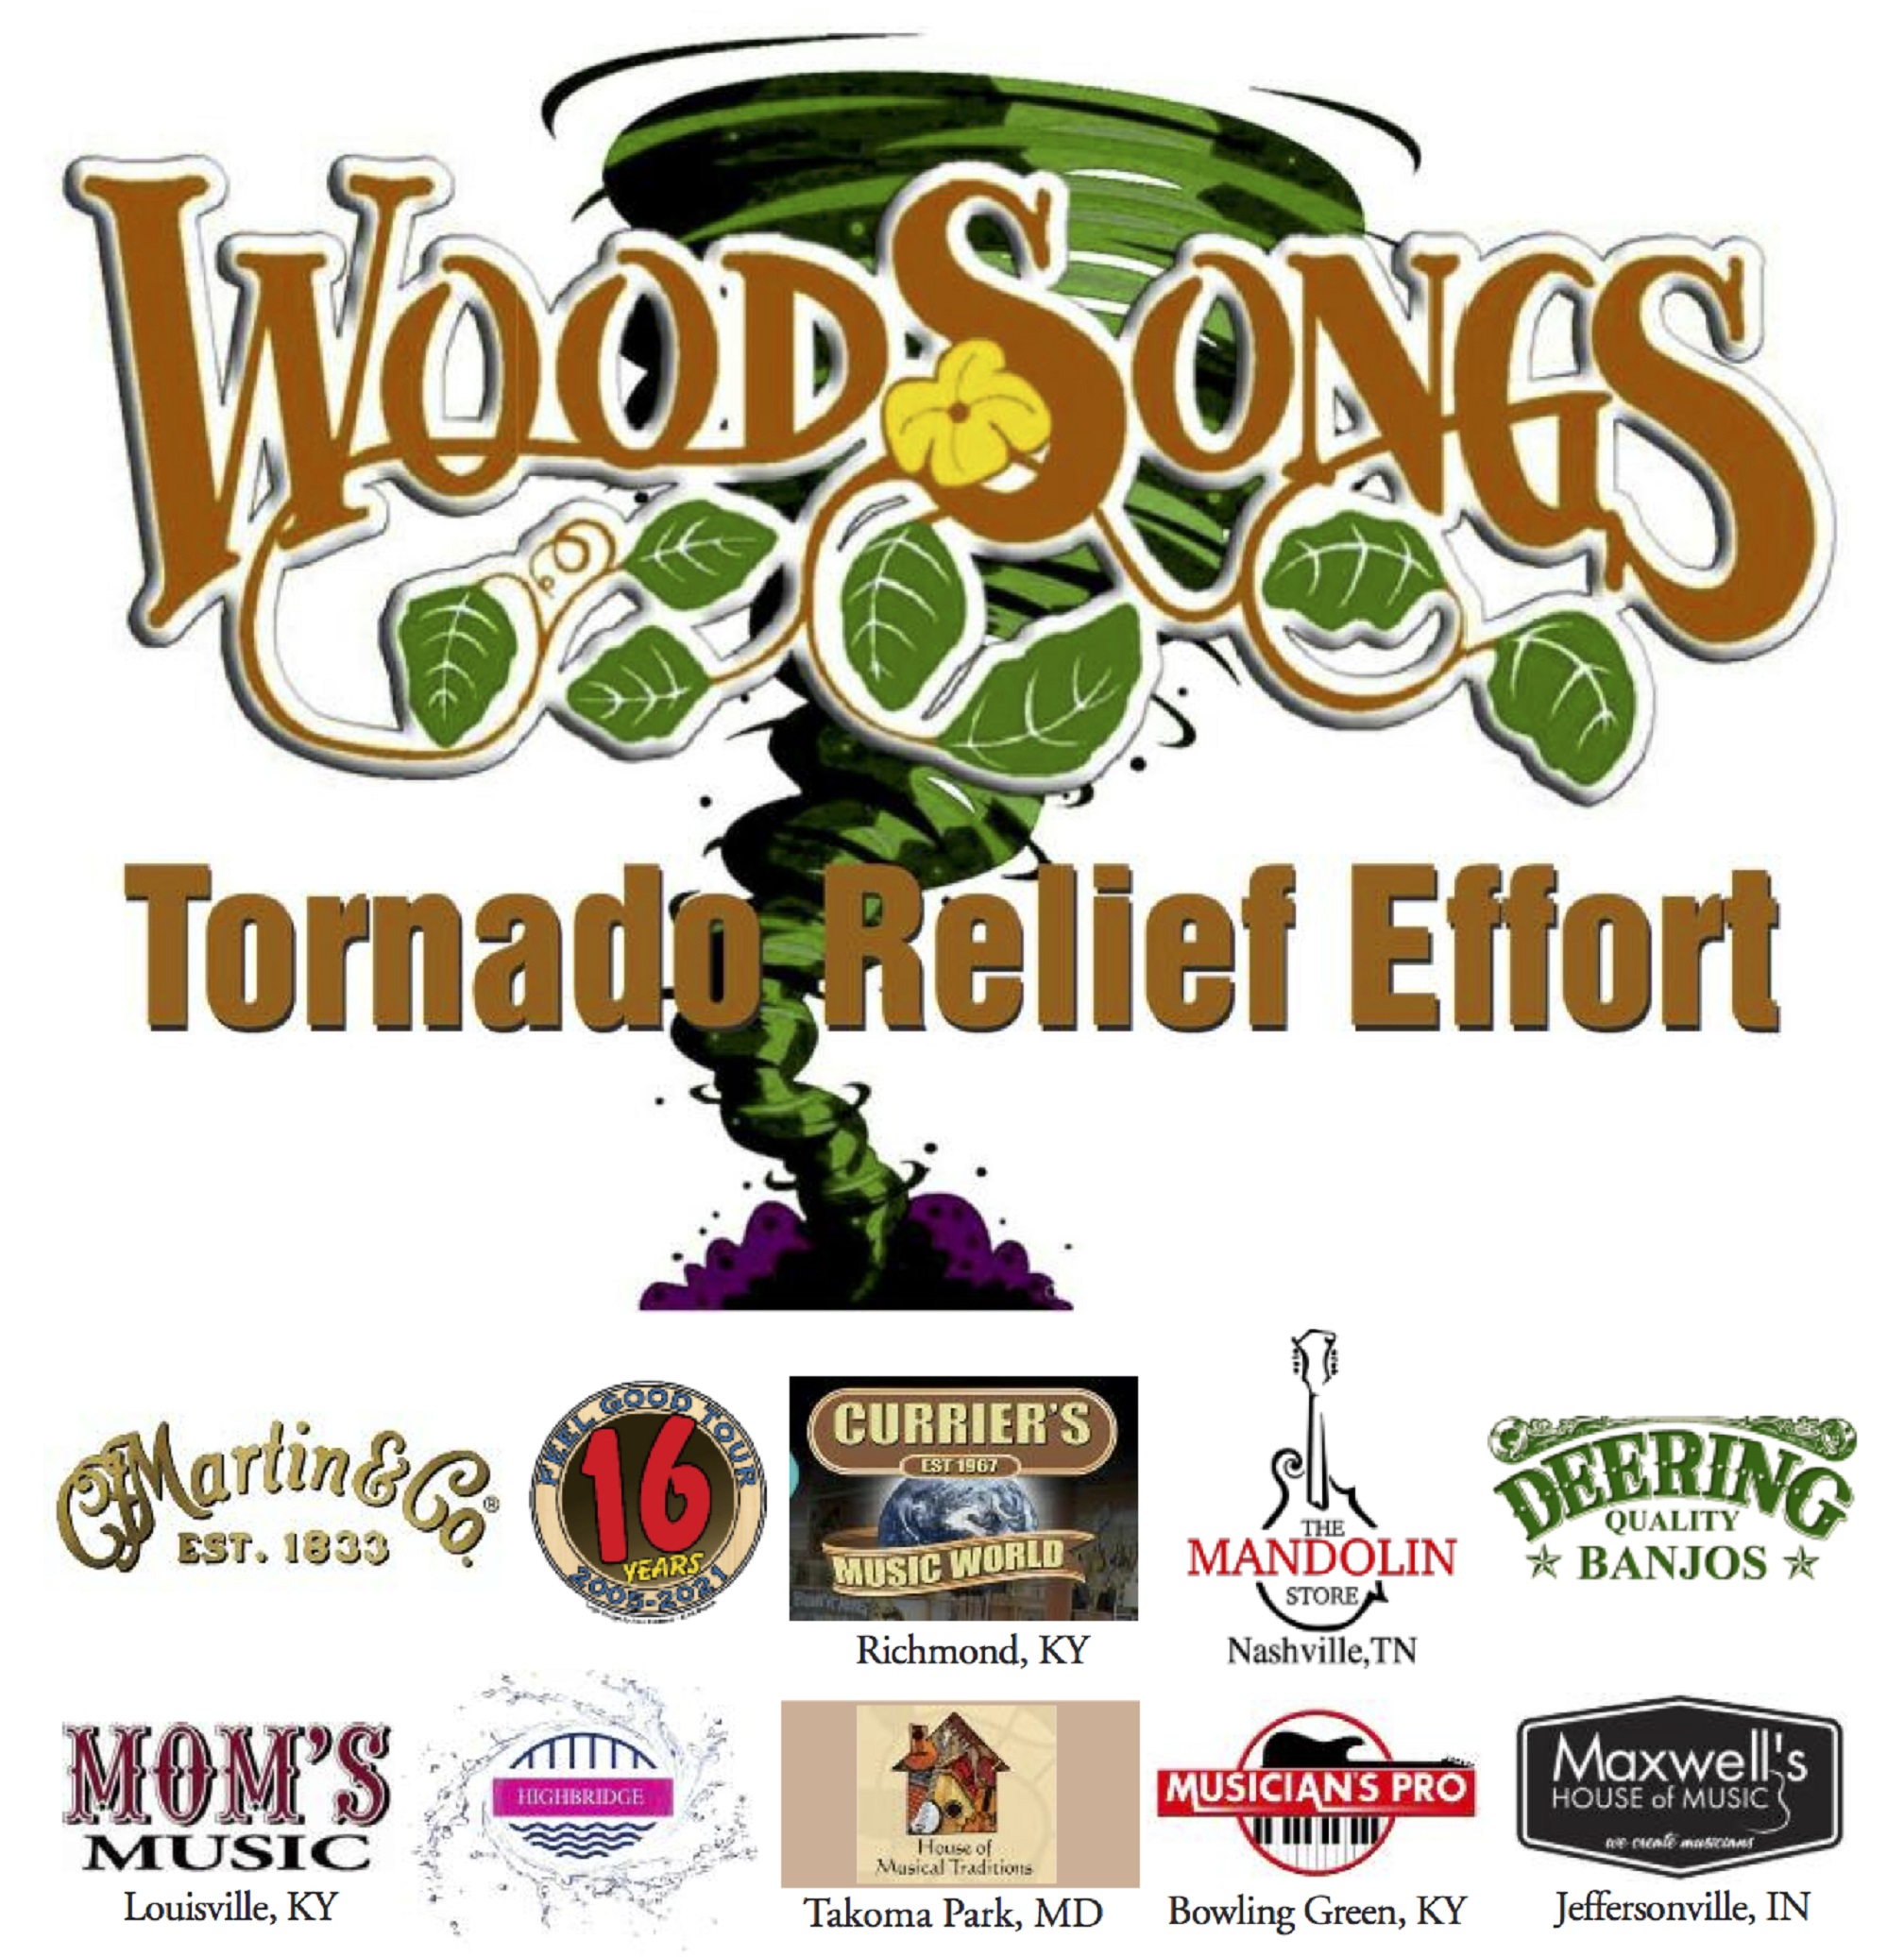 WoodSongs Tornado Relief Effort Inspires Industry Support From Brands & Music Stores Throughout Kentucky, Tennessee & Indiana